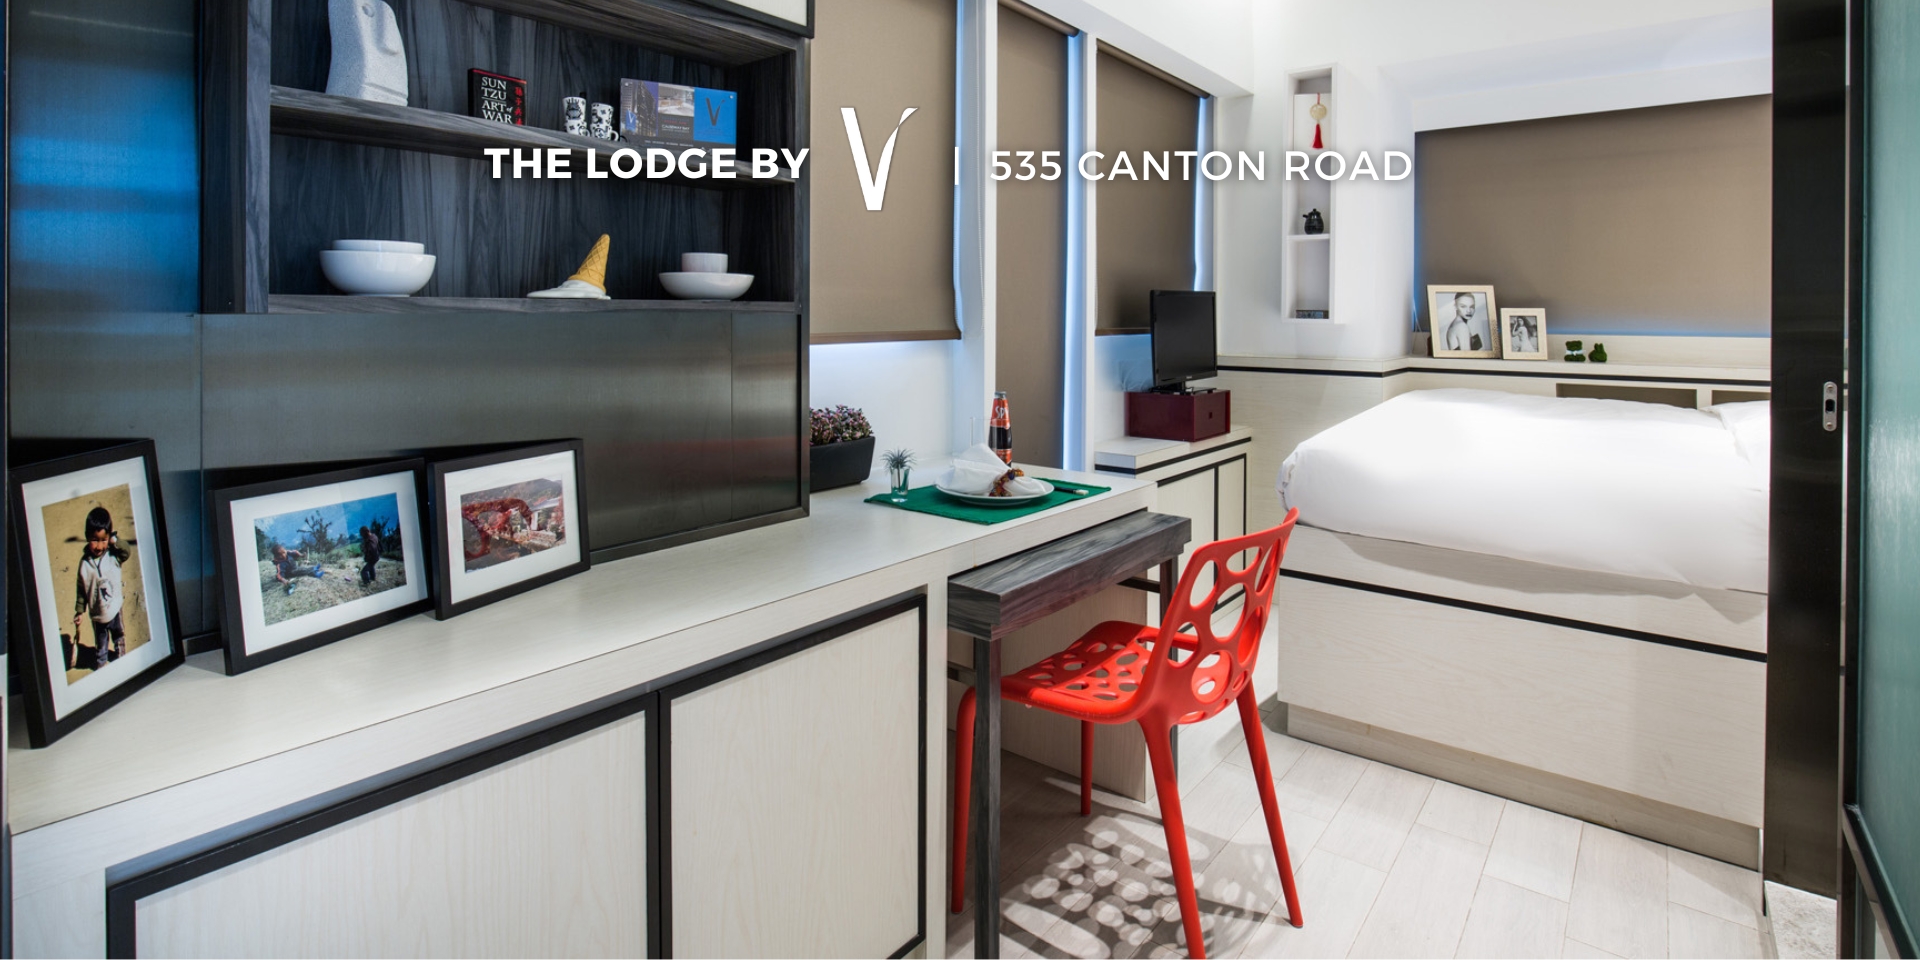 The Lodge by V Serviced Apartments in West Kowloon